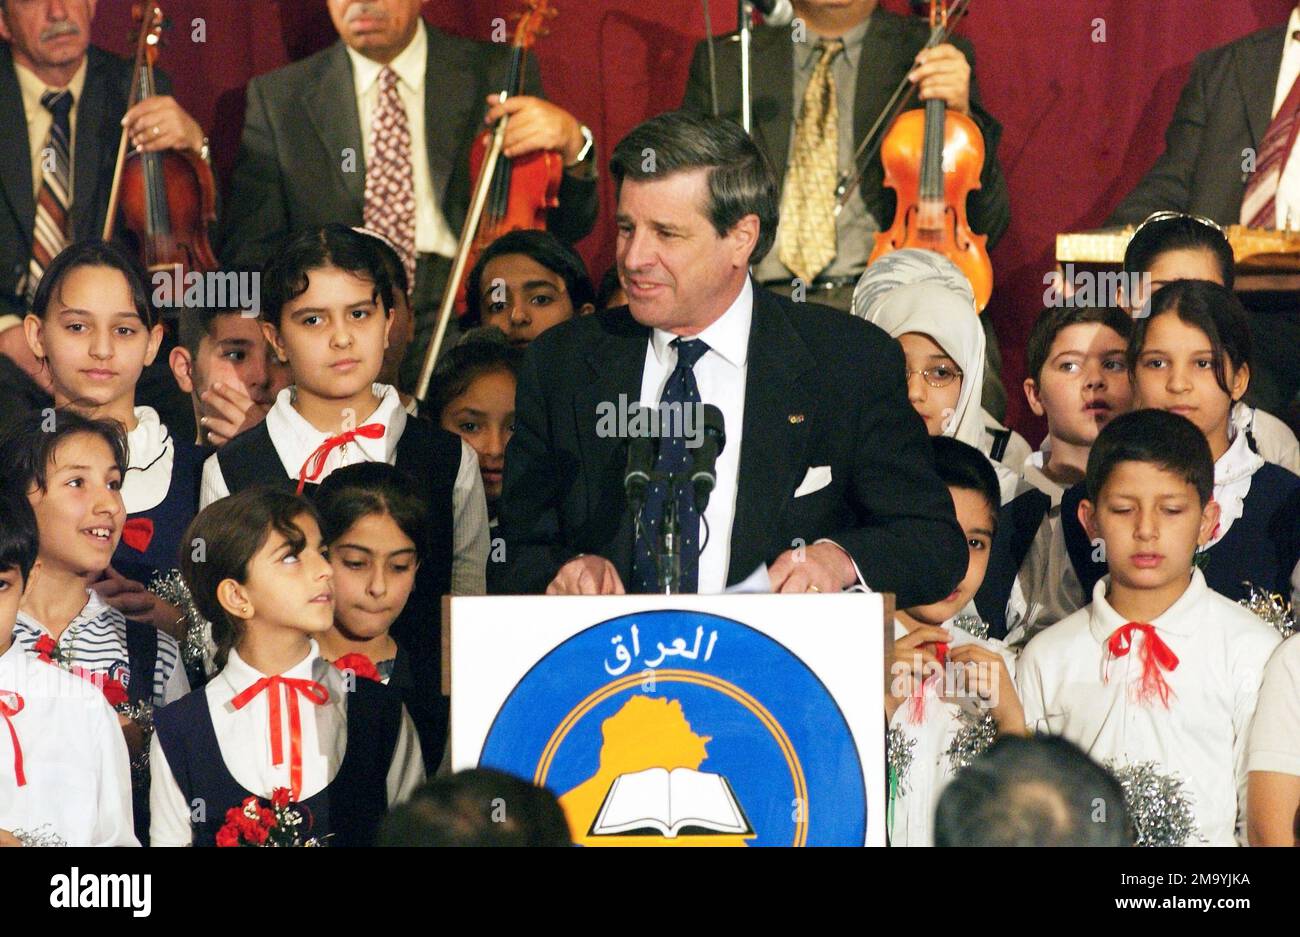 US Ambassador, the Honorable L. Paul Bremer, III, speaks at the Ministry of Education in Baghdad, on the current situation and new perspectives for education in Iraq during Operation IRAQI FREEDOM. Subject Operation/Series: IRAQI FREEDOM Base: Baghdad Country: Iraq (IRQ) Stock Photo